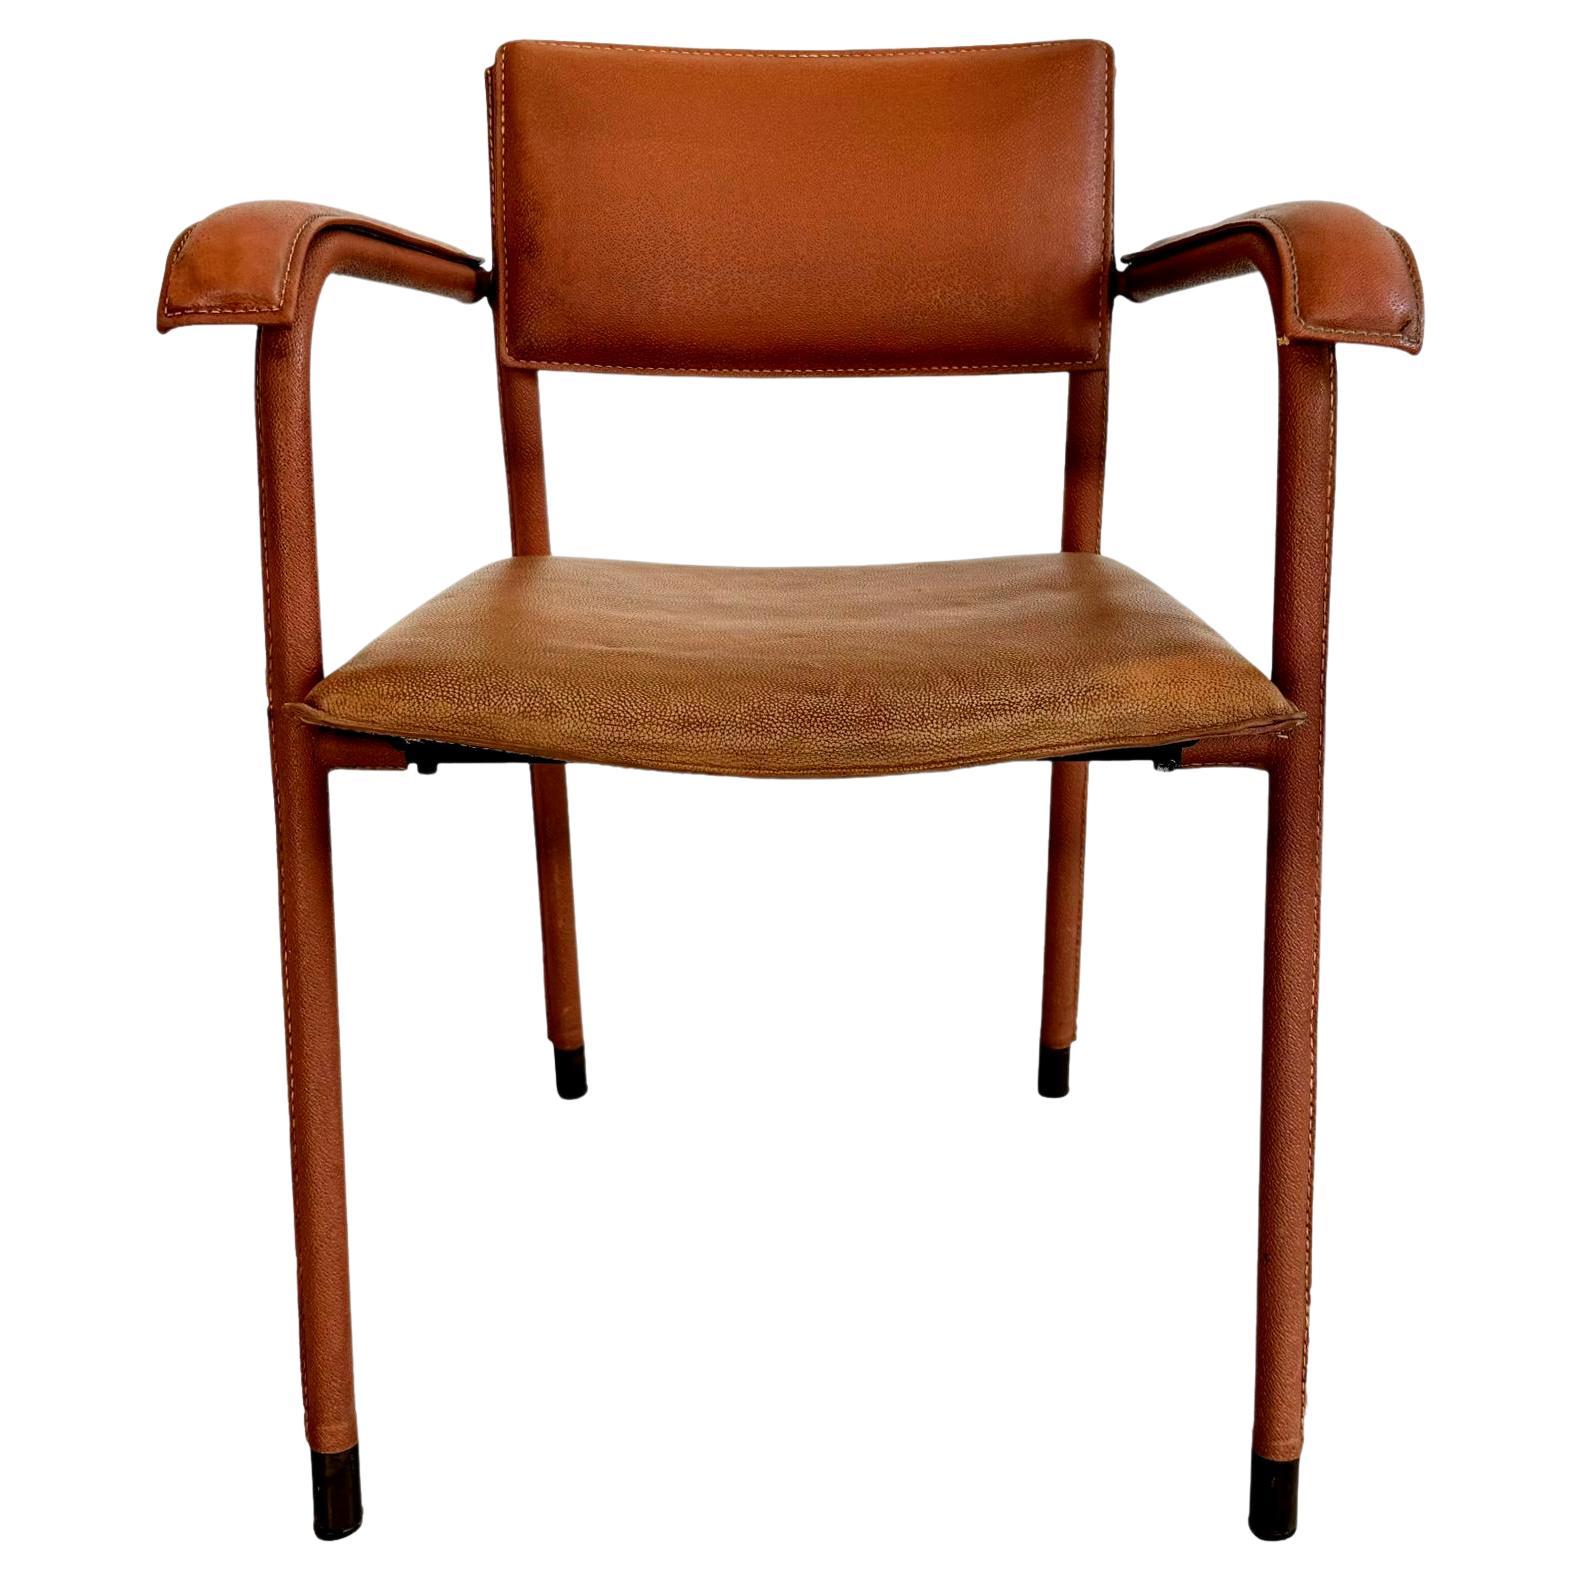 Jacques Adnet Leather Armchair, 1950s France For Sale